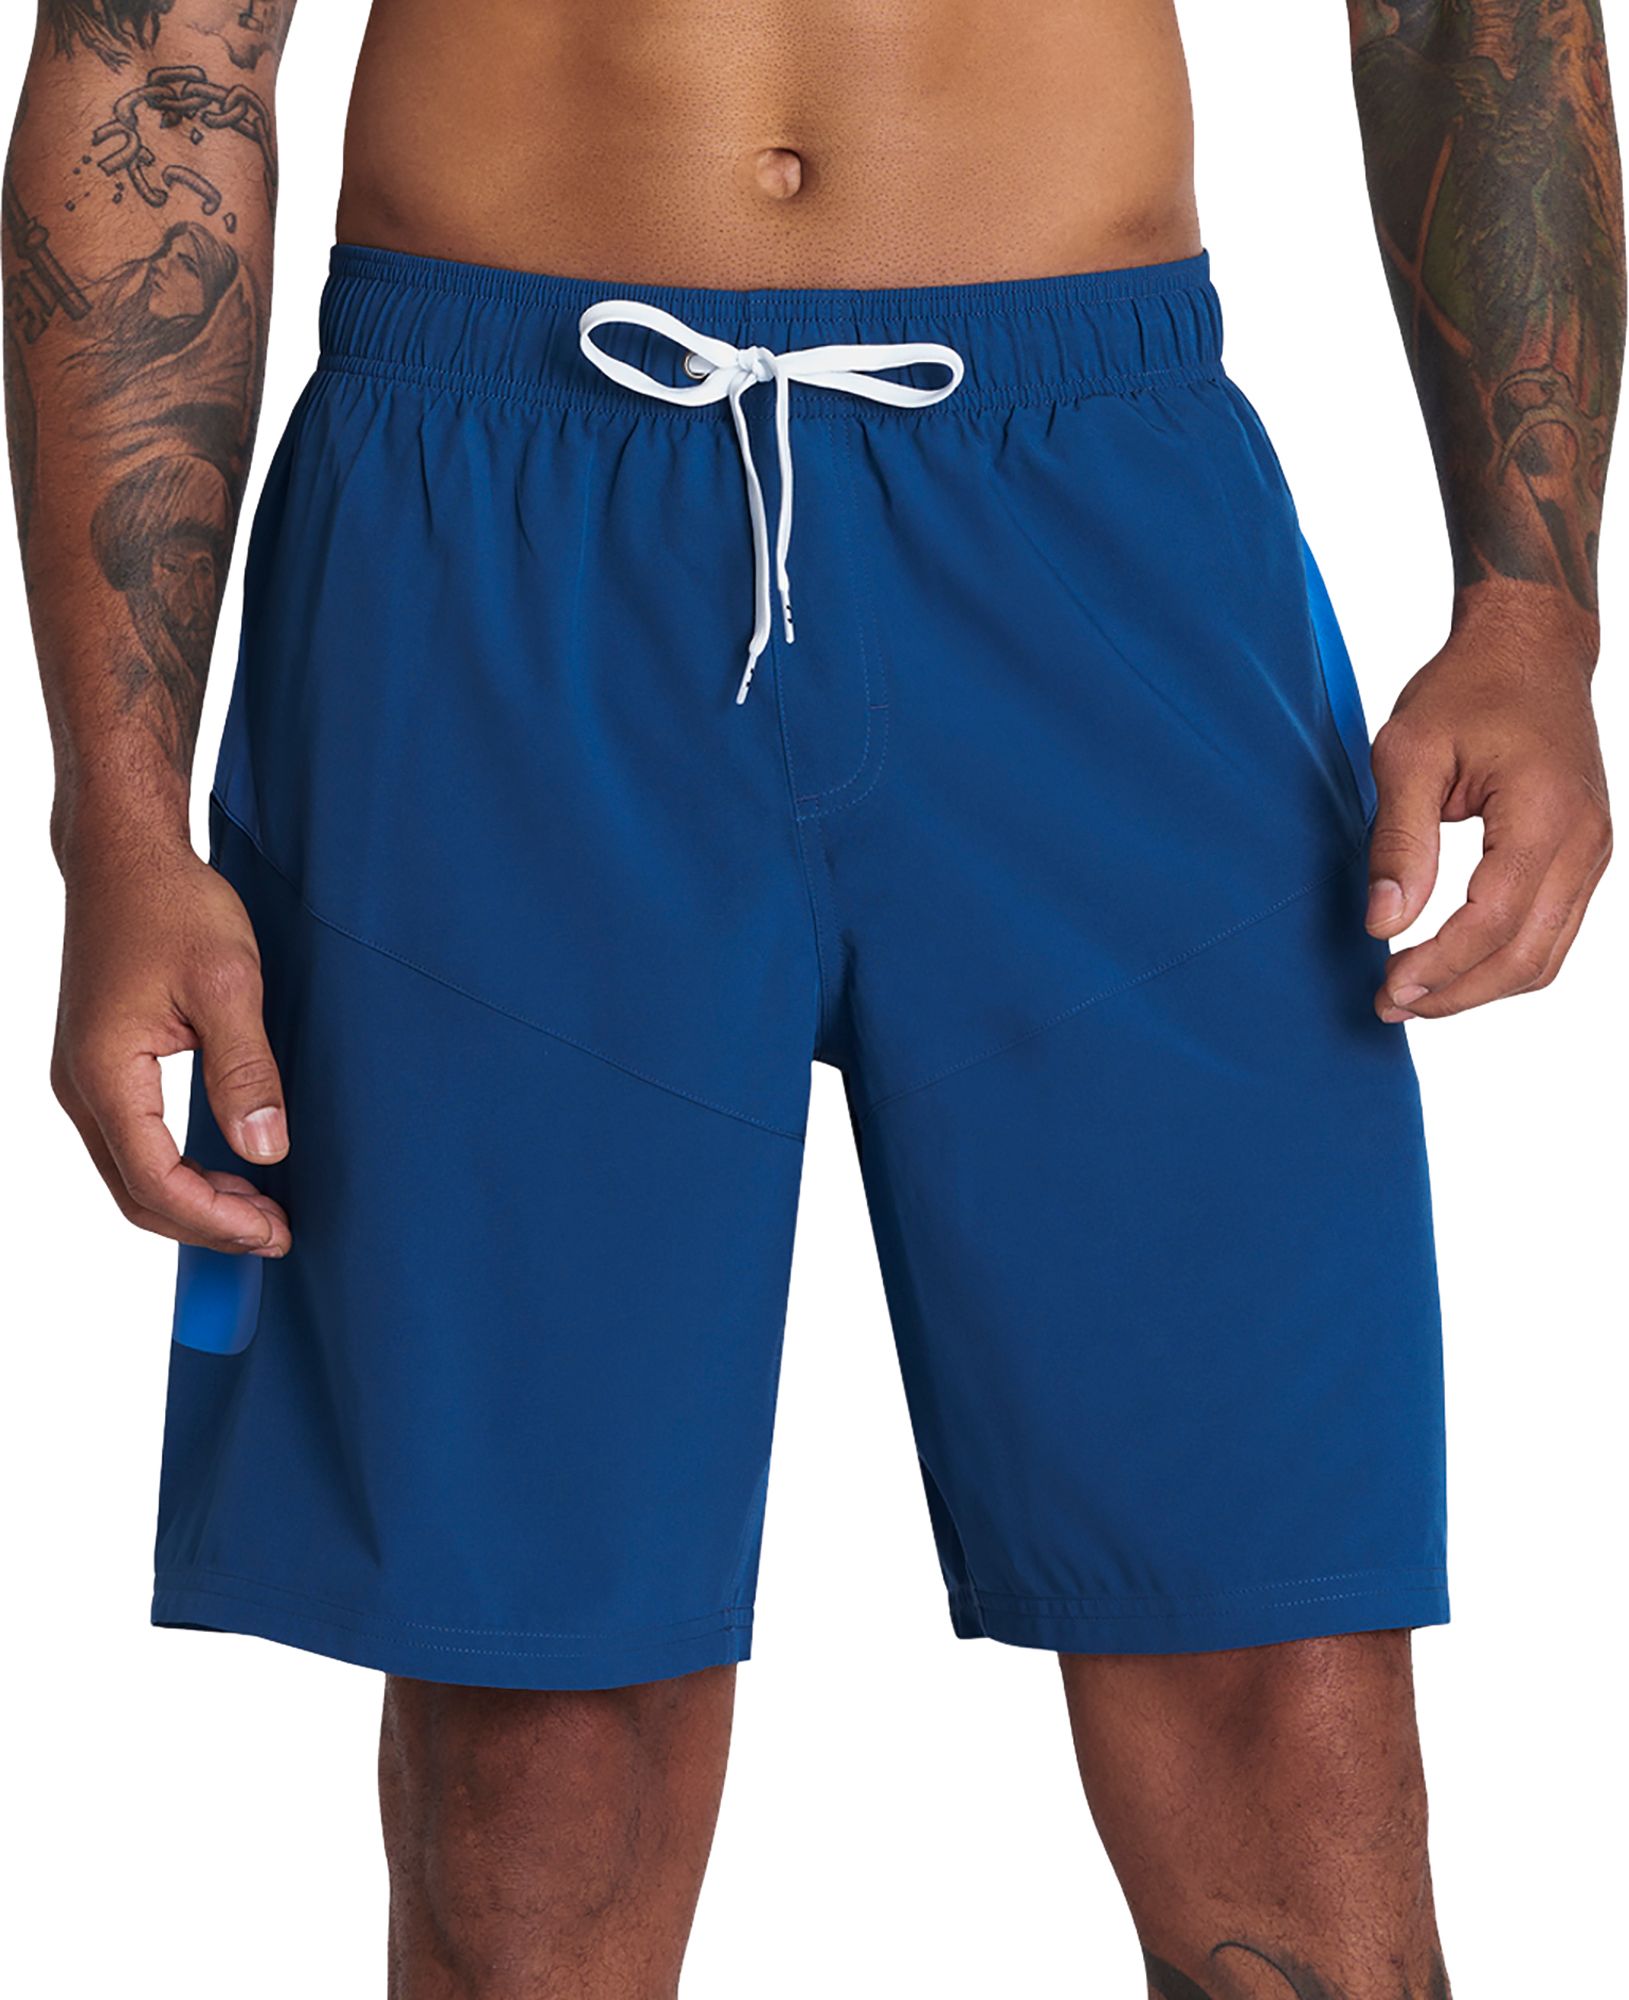 Under Armour Mens Point Breeze Colorblock Volley 9 Swim Trunks